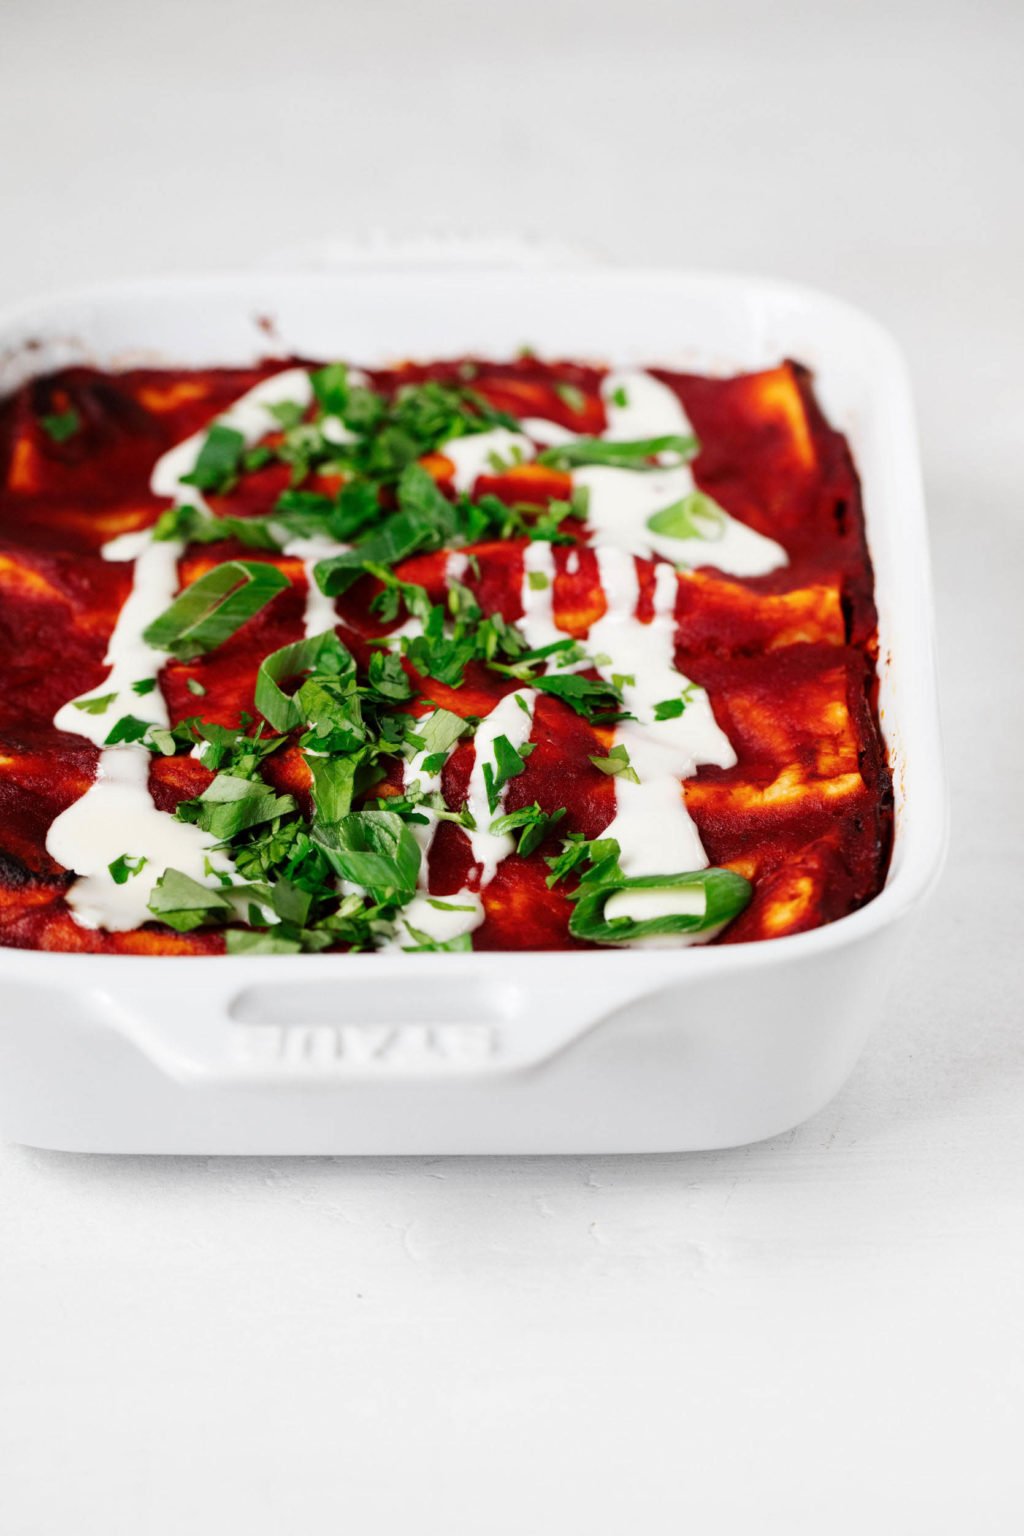 A white, rectangular baking dish holds a try full of freshly baked, tofu-stuffed vegan enchiladas. They're covered with red sauce and garnished with cilantro.